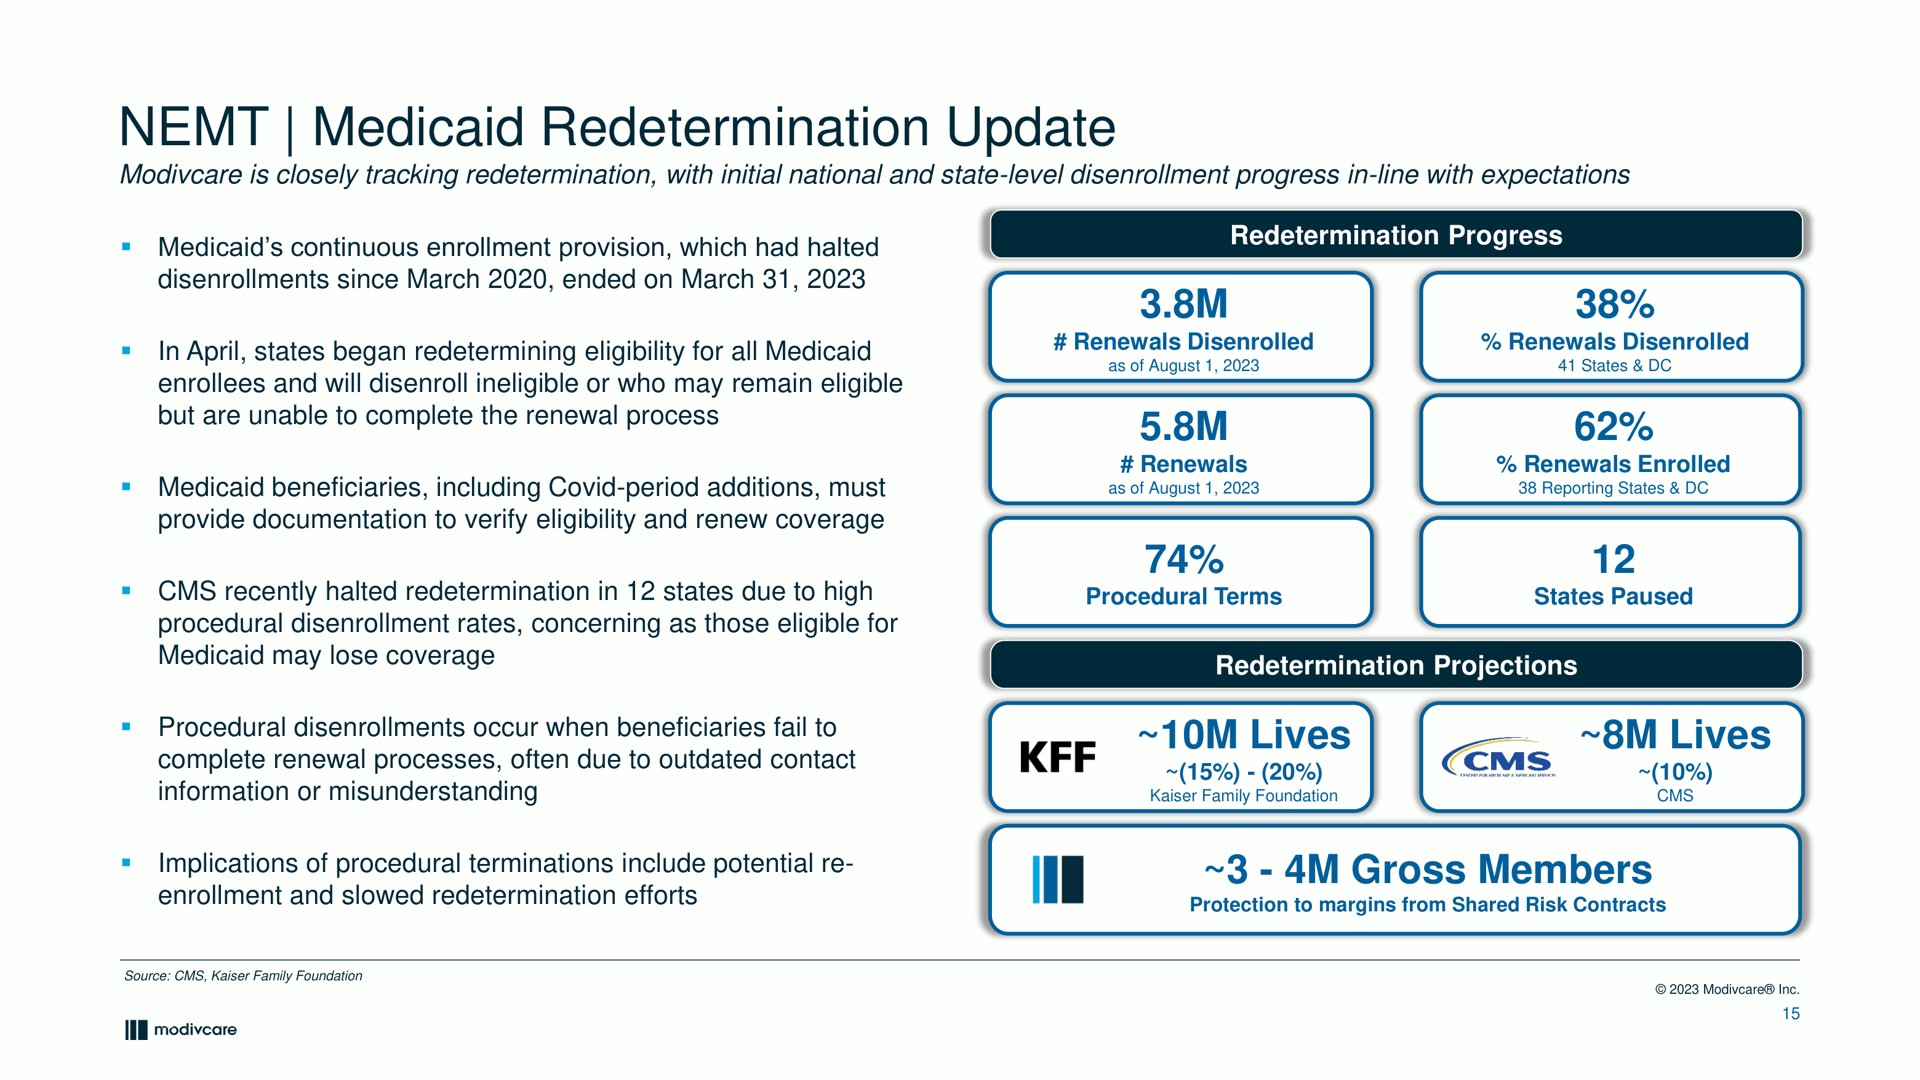 redetermination update lives lives gross members | ModivCare